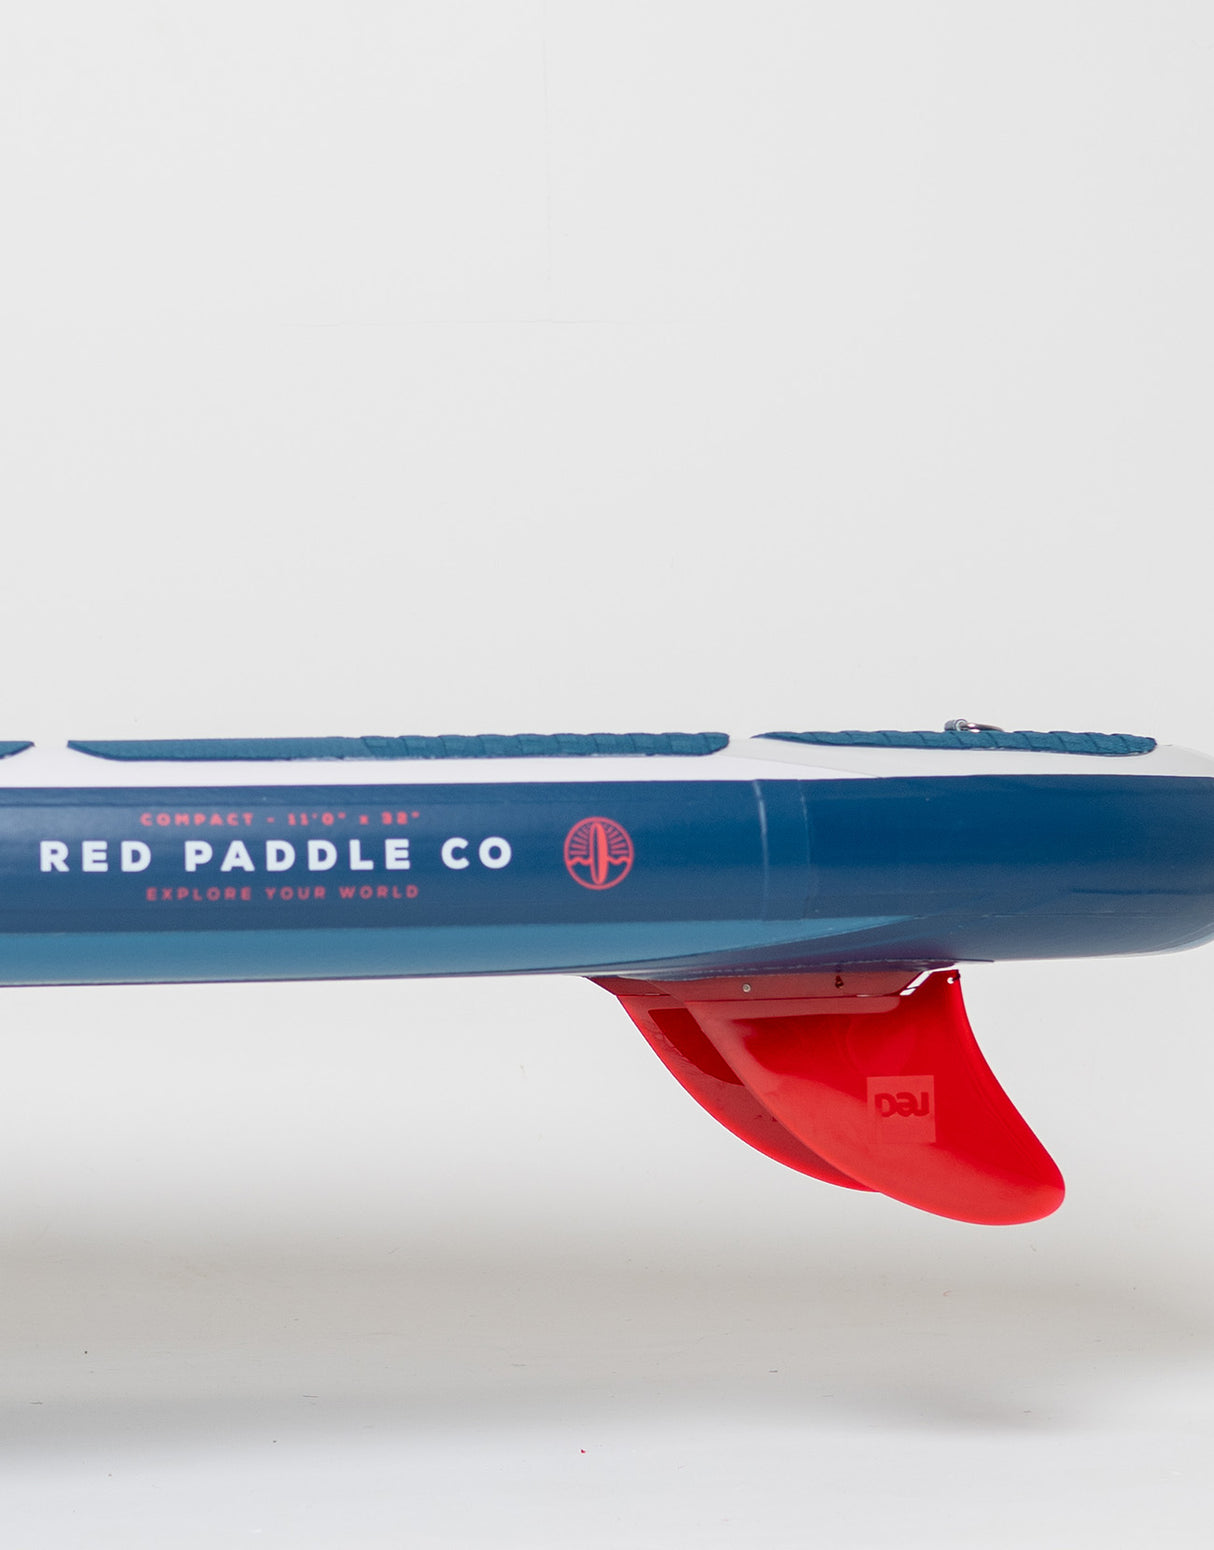 Red Paddle Co 11'0 Compact rear side